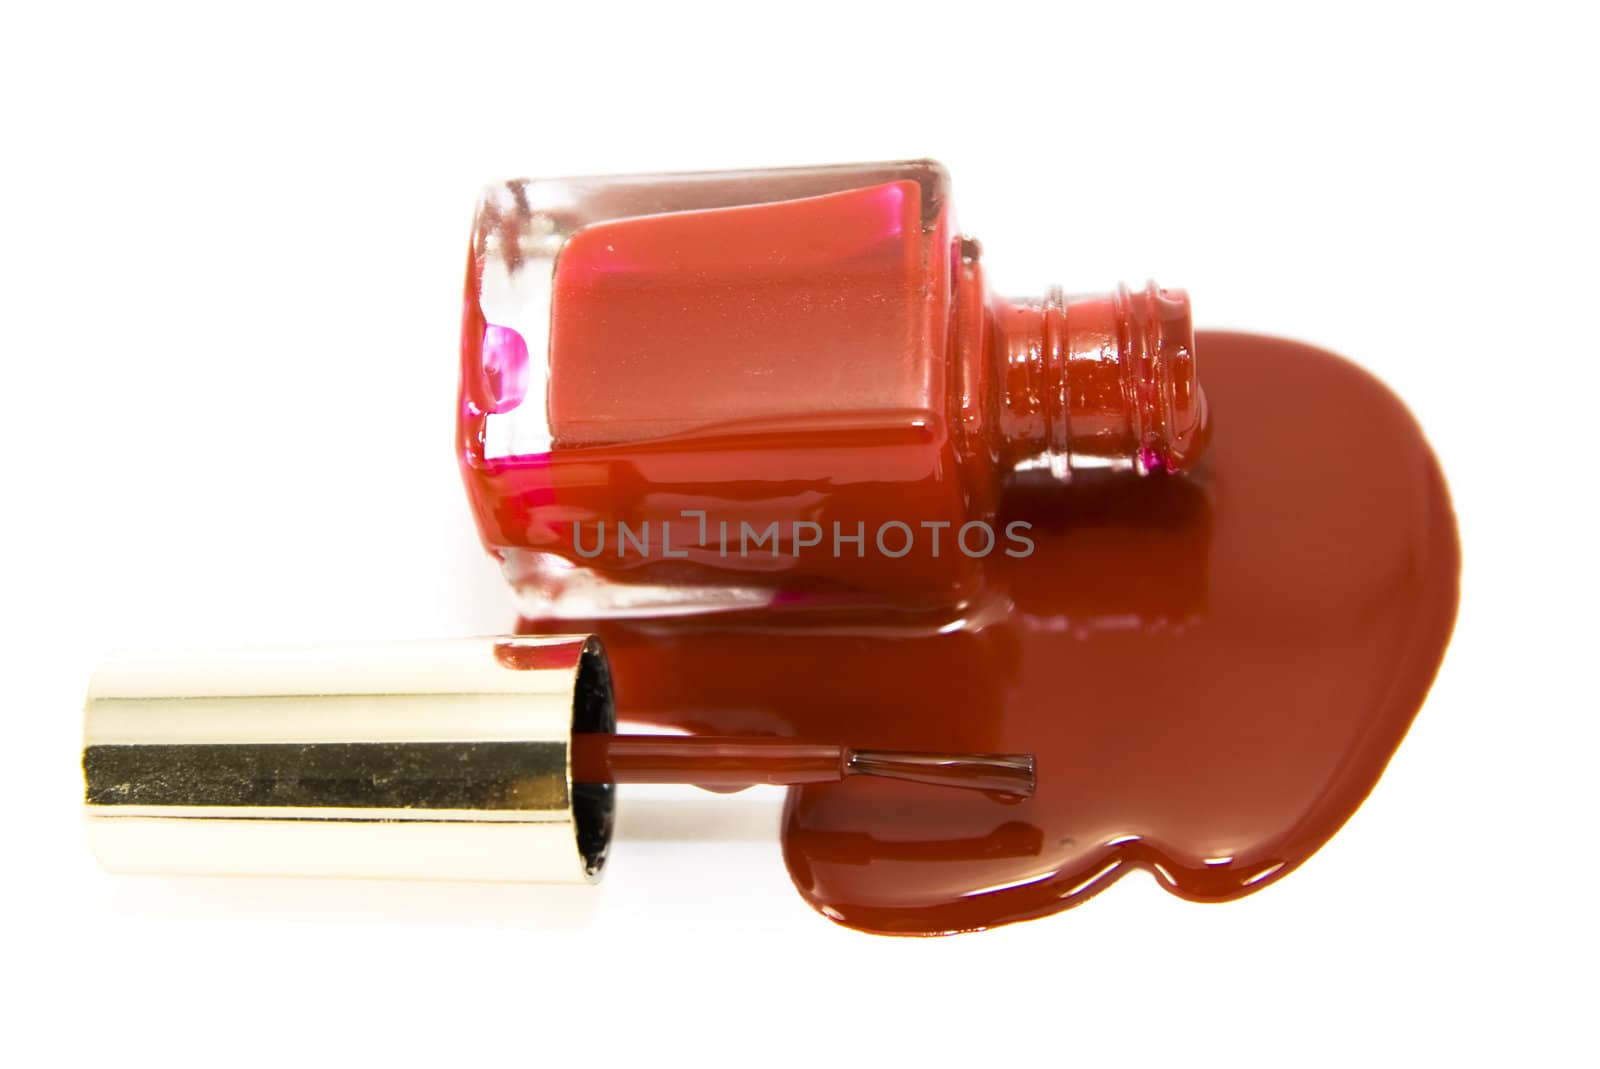 red enamel isolated on white